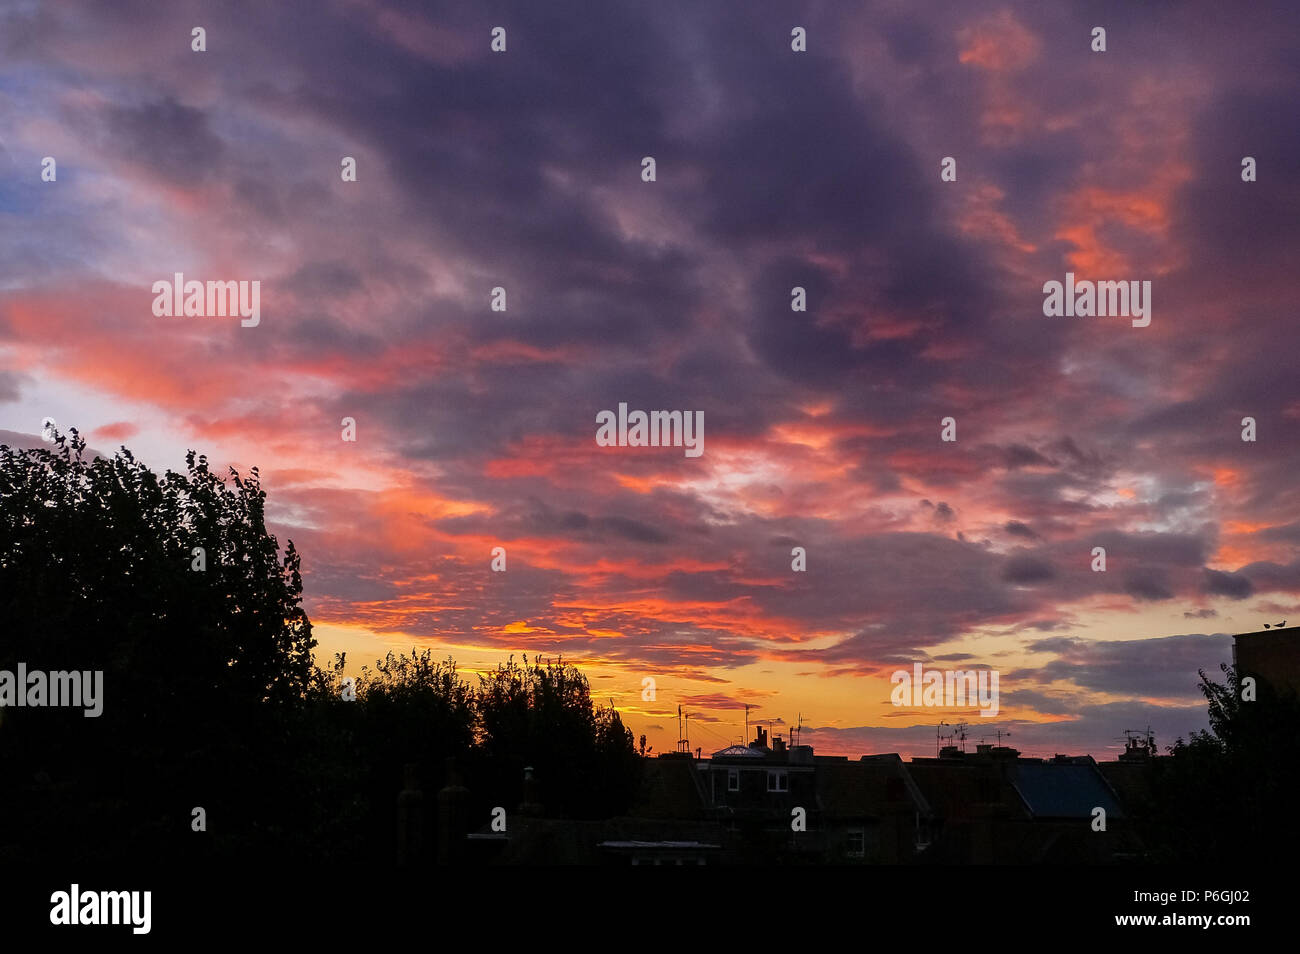 Silhouetted trees and tv aerials on rooftops in a English town at sunset Stock Photo